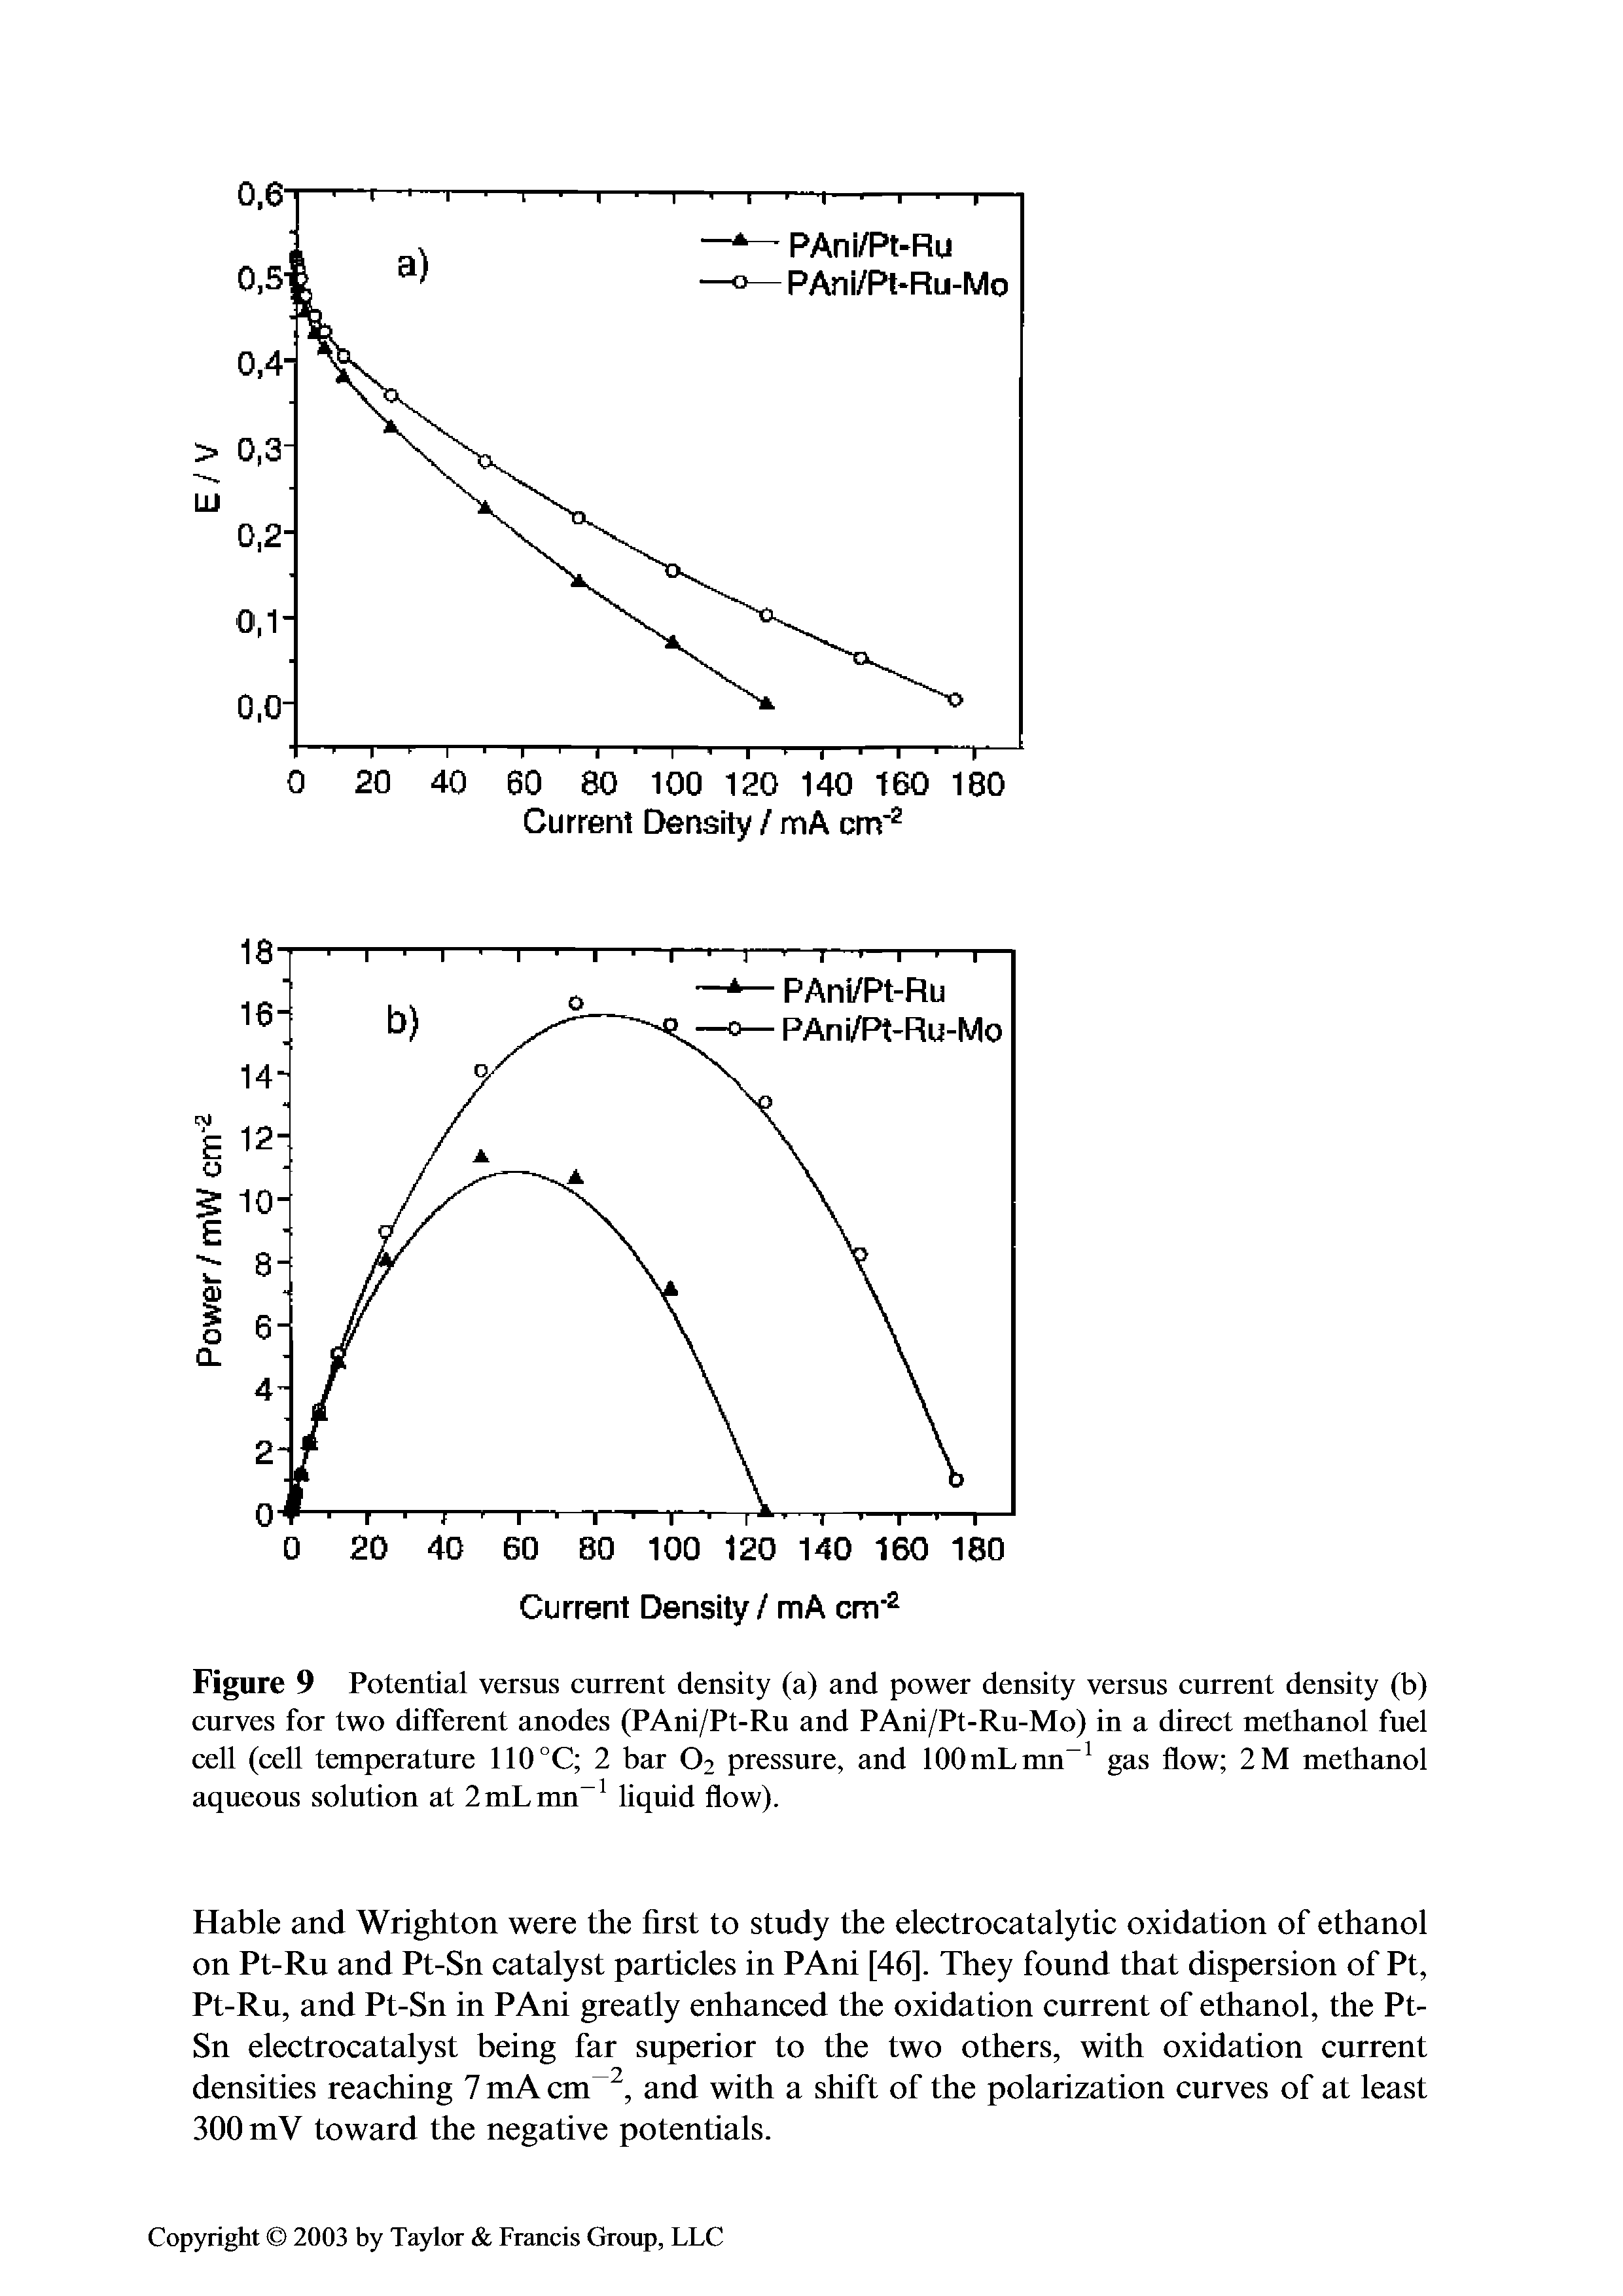 Figure 9 Potential versus current density (a) and power density versus current density (b) curves for two different anodes (PAni/Pt-Ru and PAni/Pt-Ru-Mo) in a direct methanol fuel cell (cell temperature 110°C 2 bar O2 pressure, and lOOmLmn gas flow 2M methanol aqueous solution at 2mLmn liquid flow).